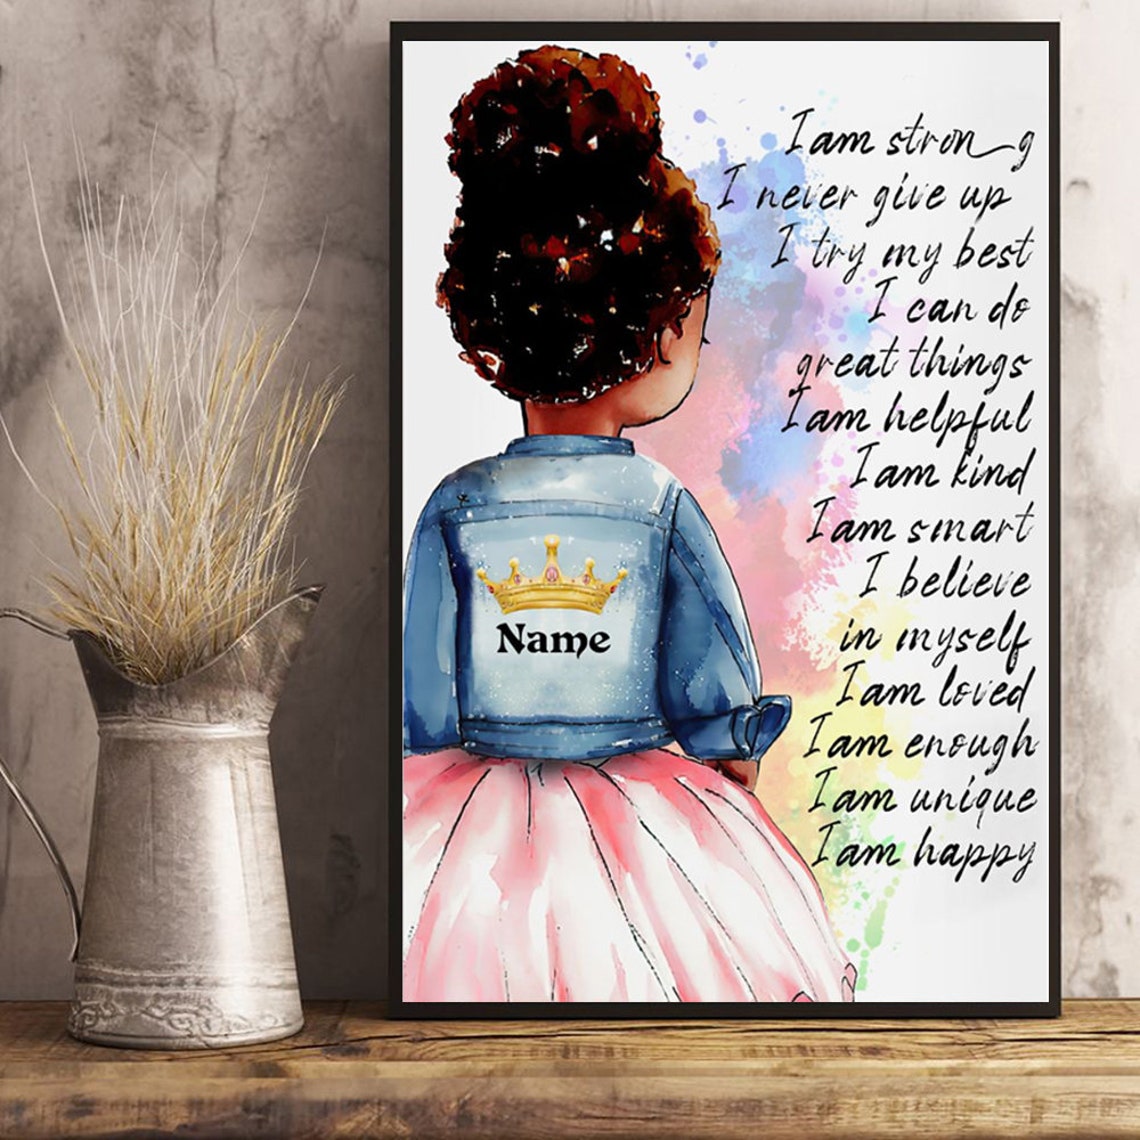 Personalized Black Girl Canvas, Custom Name Canvas, Black Girl You Are Beautiful Black Teenage Canvas